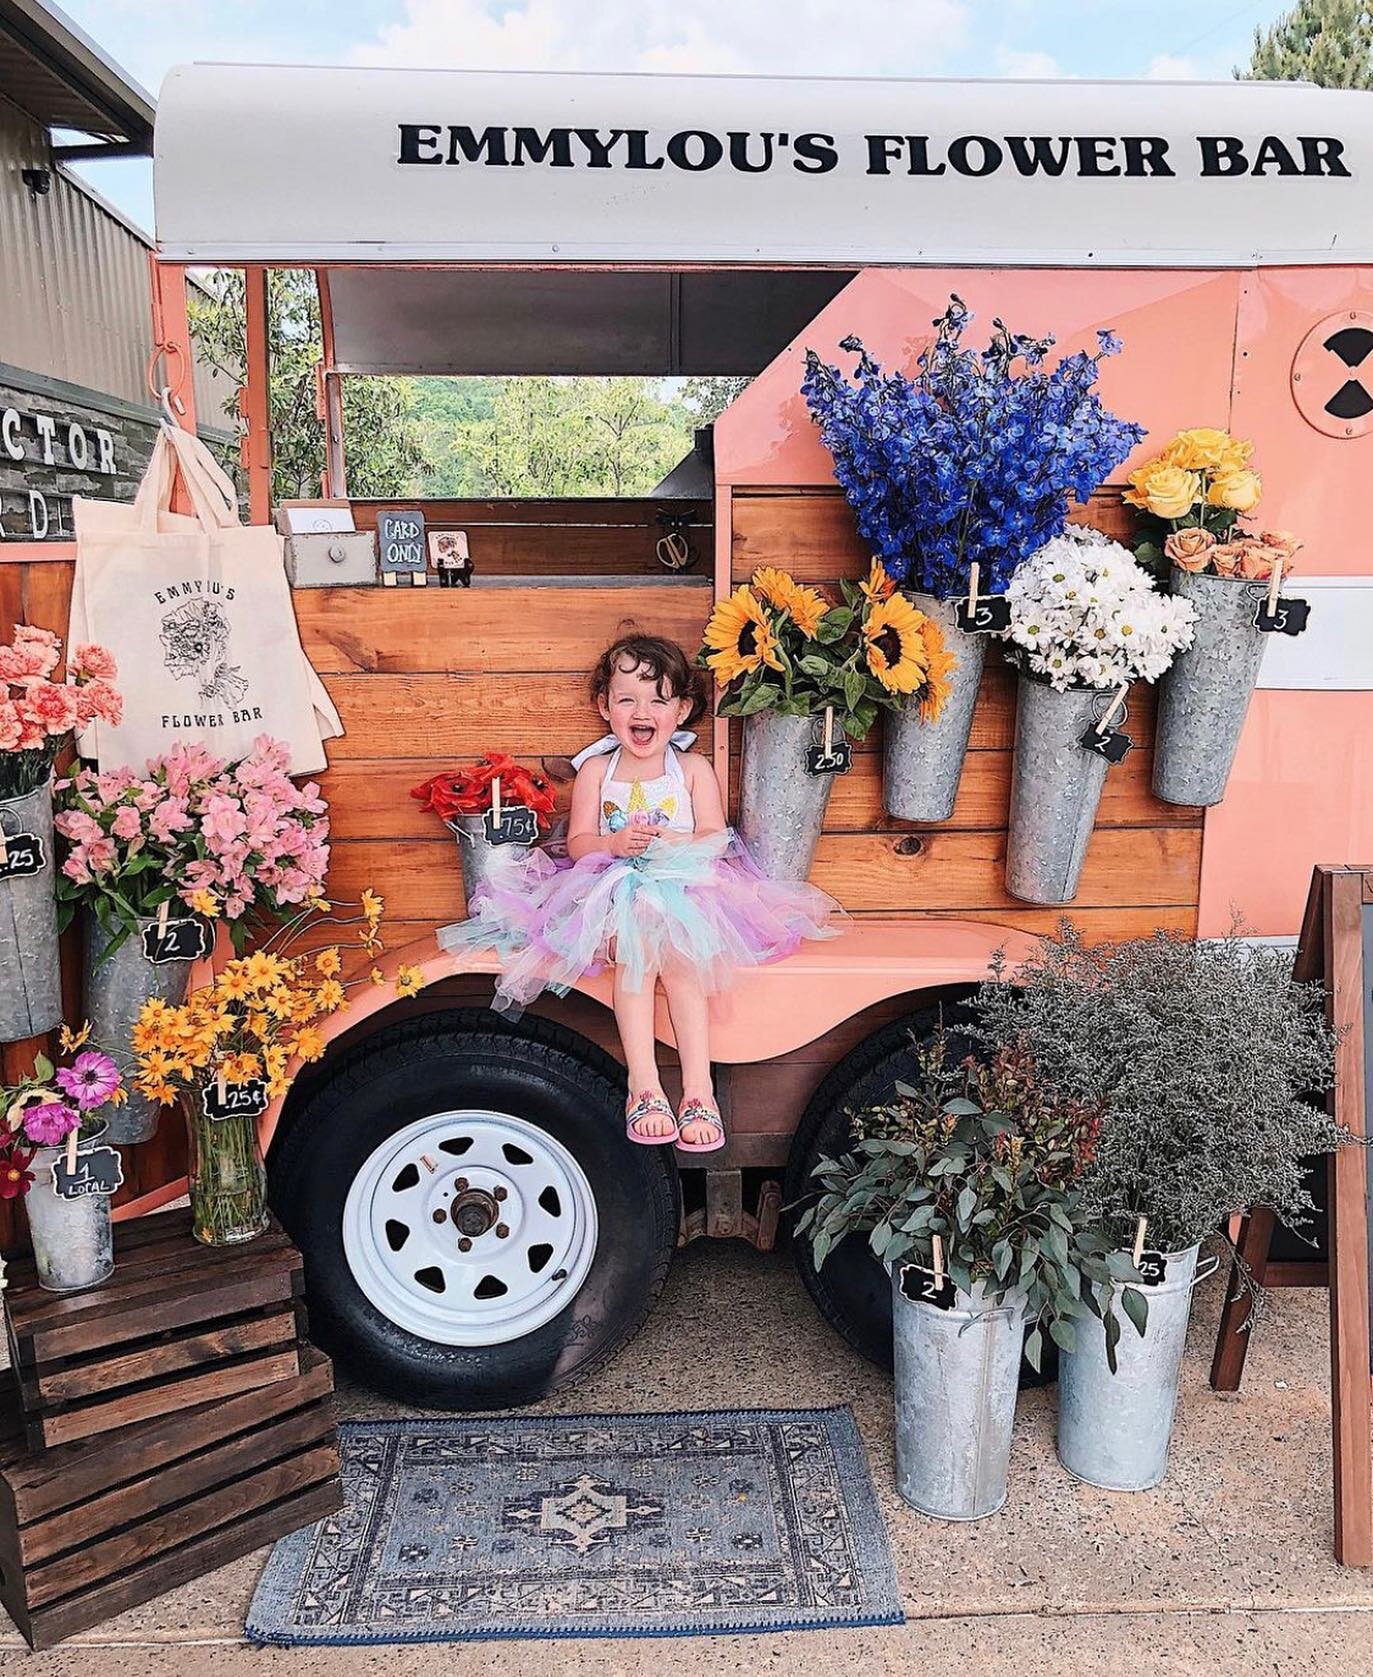 This first week of May has us excited for next weekend! Pick up some blooms for Mom from @emmylousflowerbar_ at Shiloh Square next Saturday! 💐🌺🦋